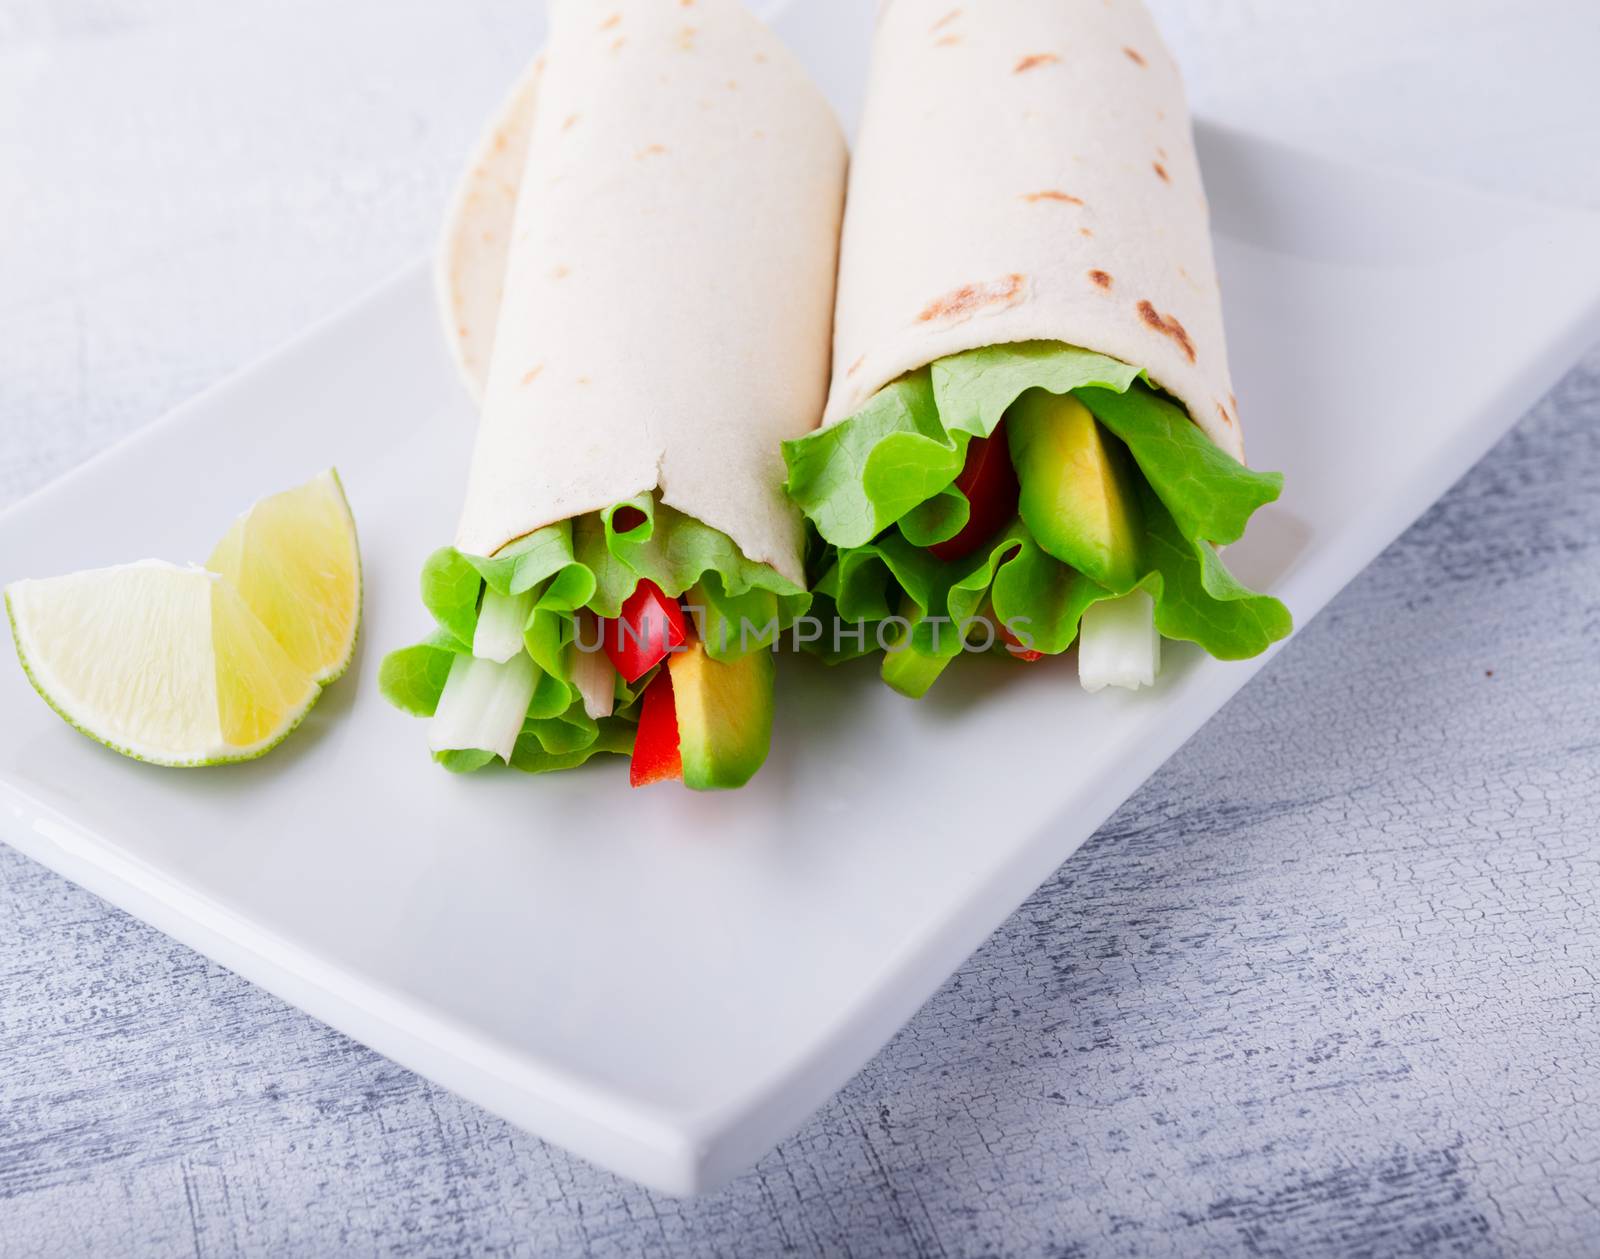 Vegetable wrap sandwiches with greenery and tomatoes